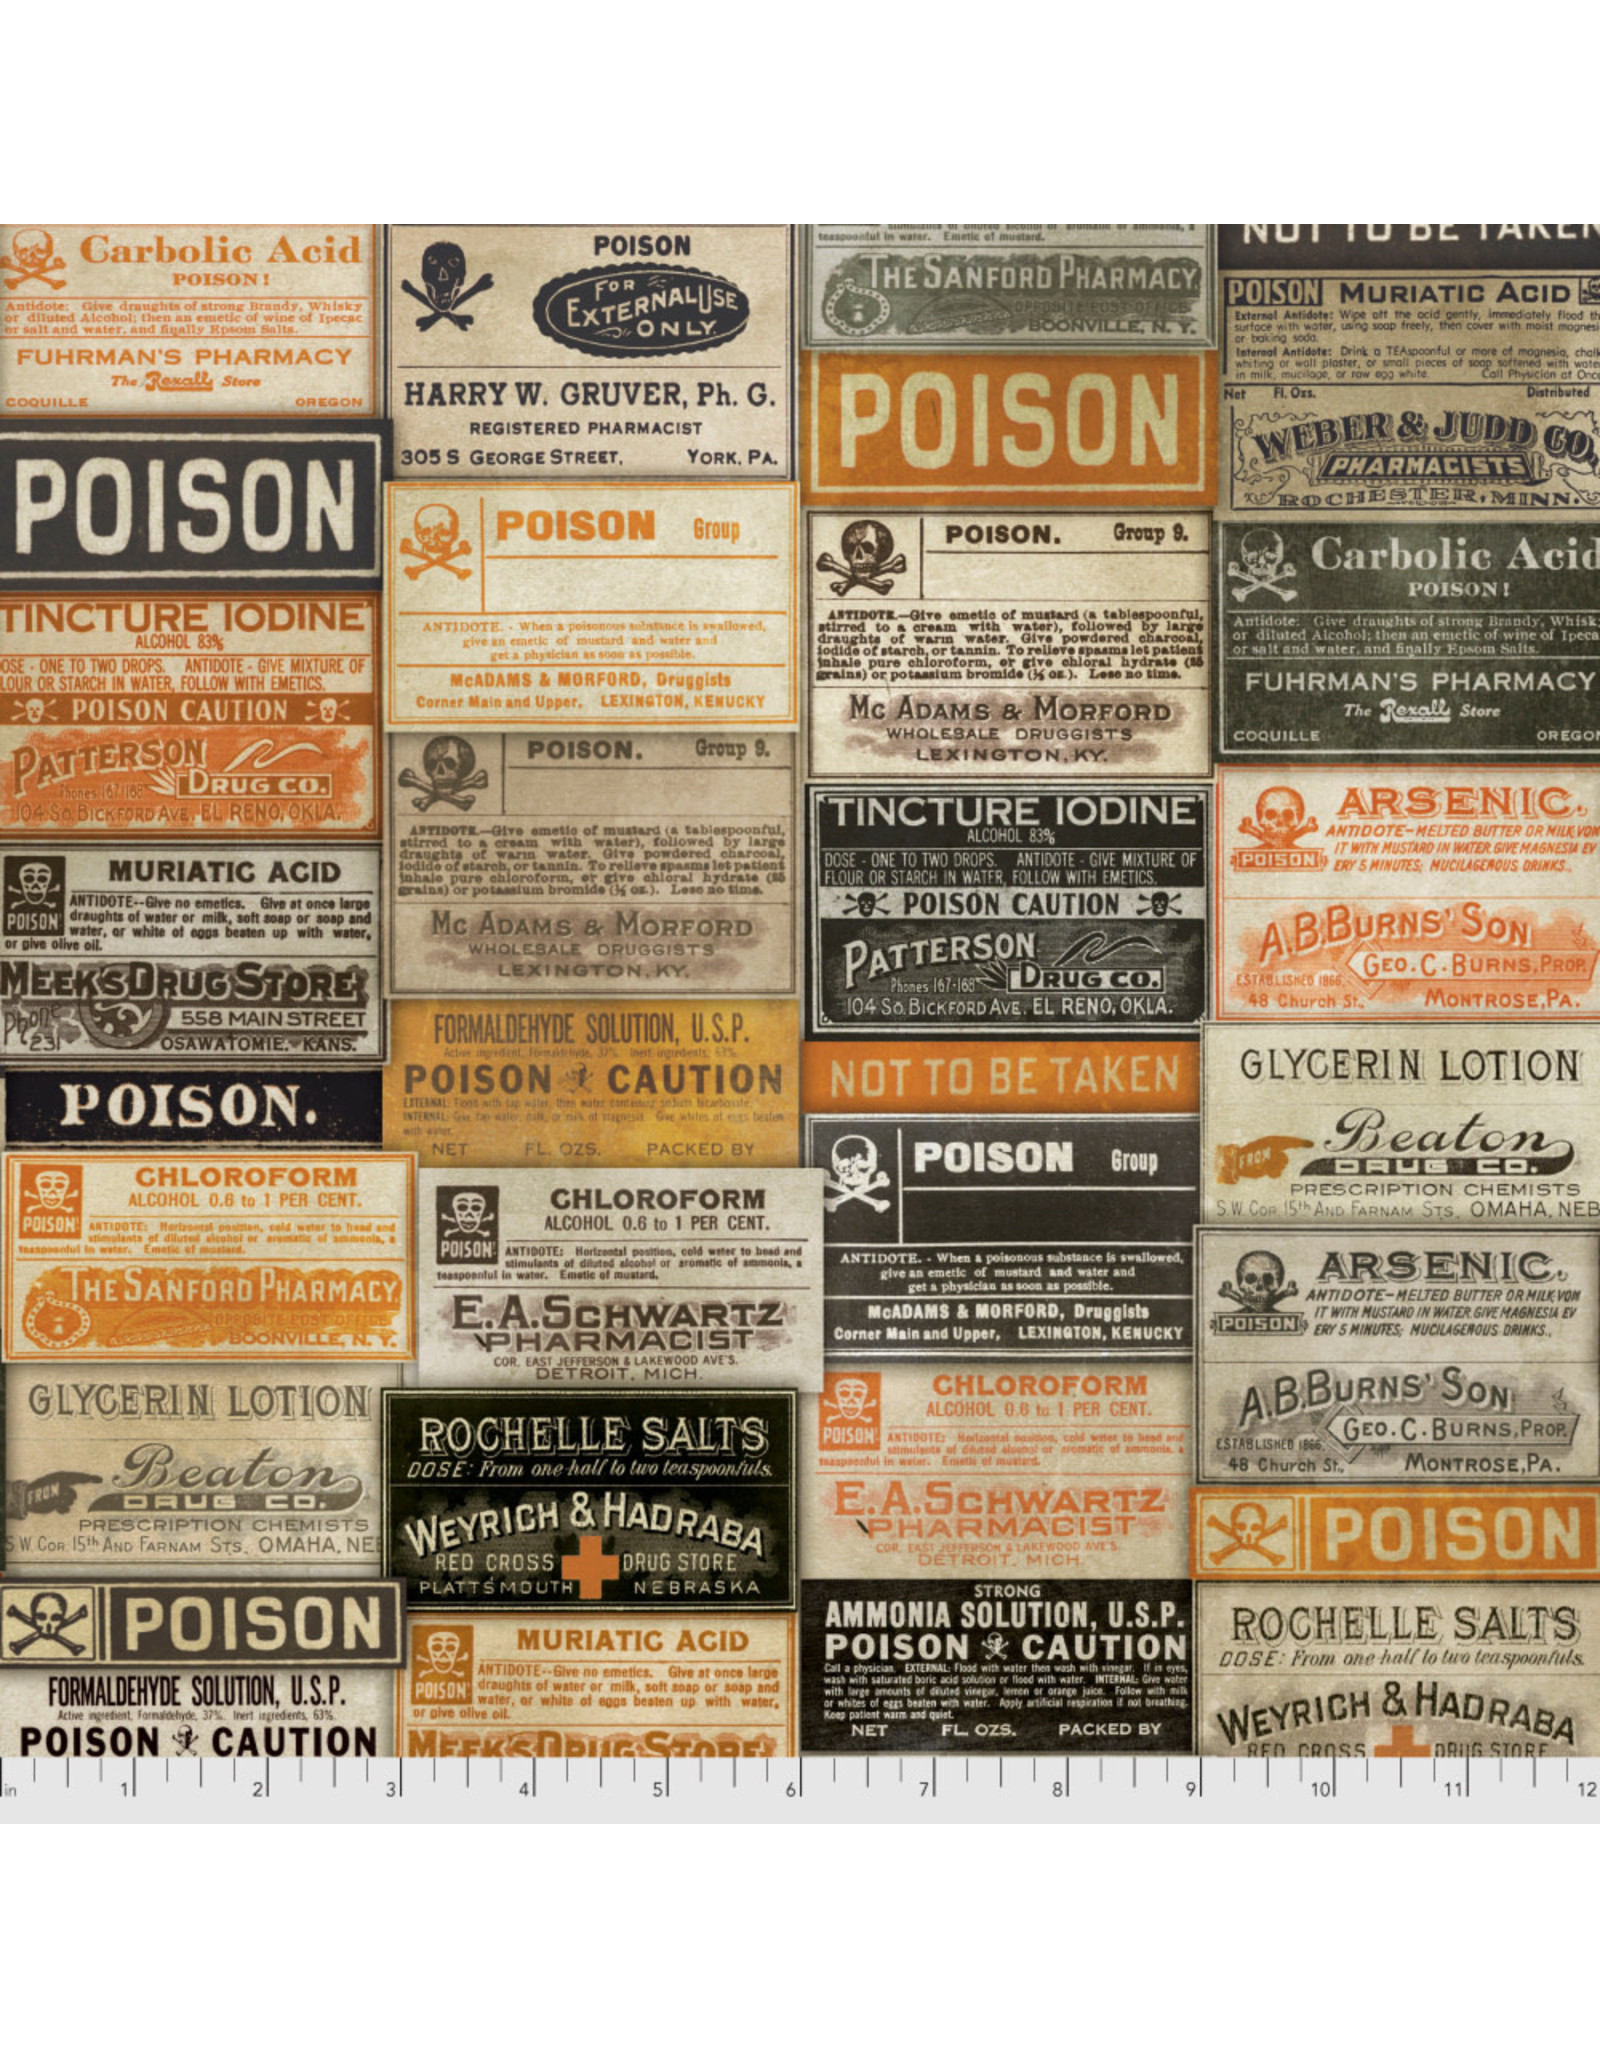 PD's Tim Holtz Collection Regions Beyond, Apothecary in Multi, Dinner Napkin